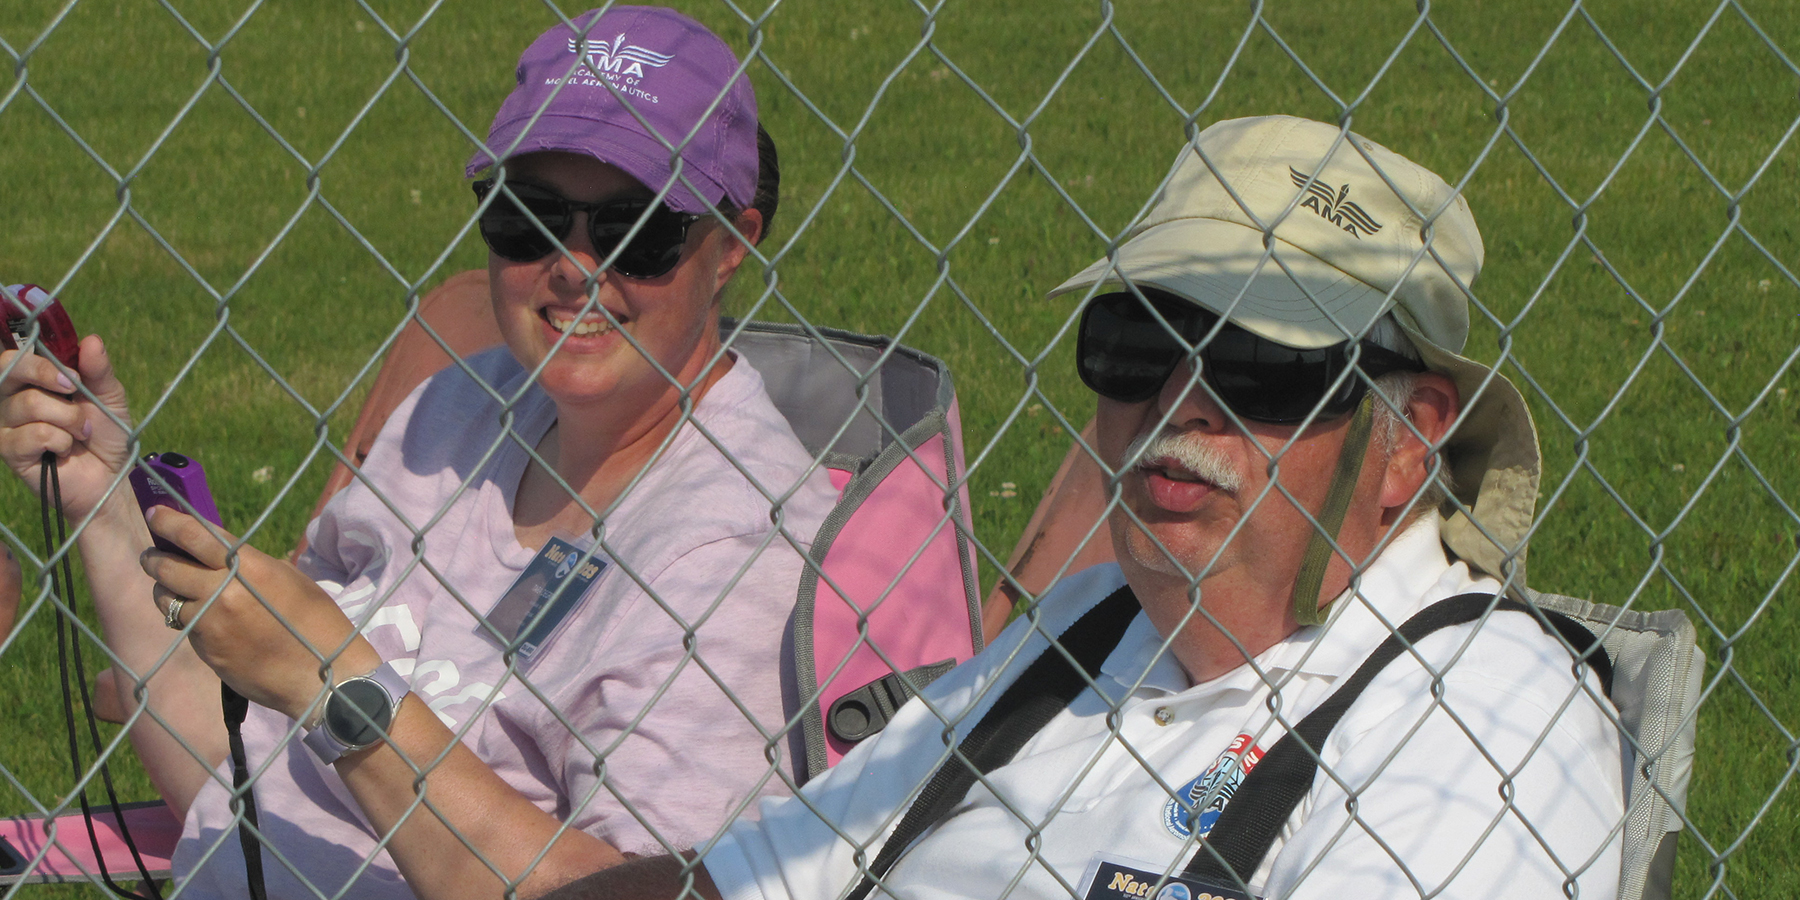 Tara DeGroff and her father, David Betz, provided great timing and enjoyed a front-row seat in the timers’ cage for all of the f